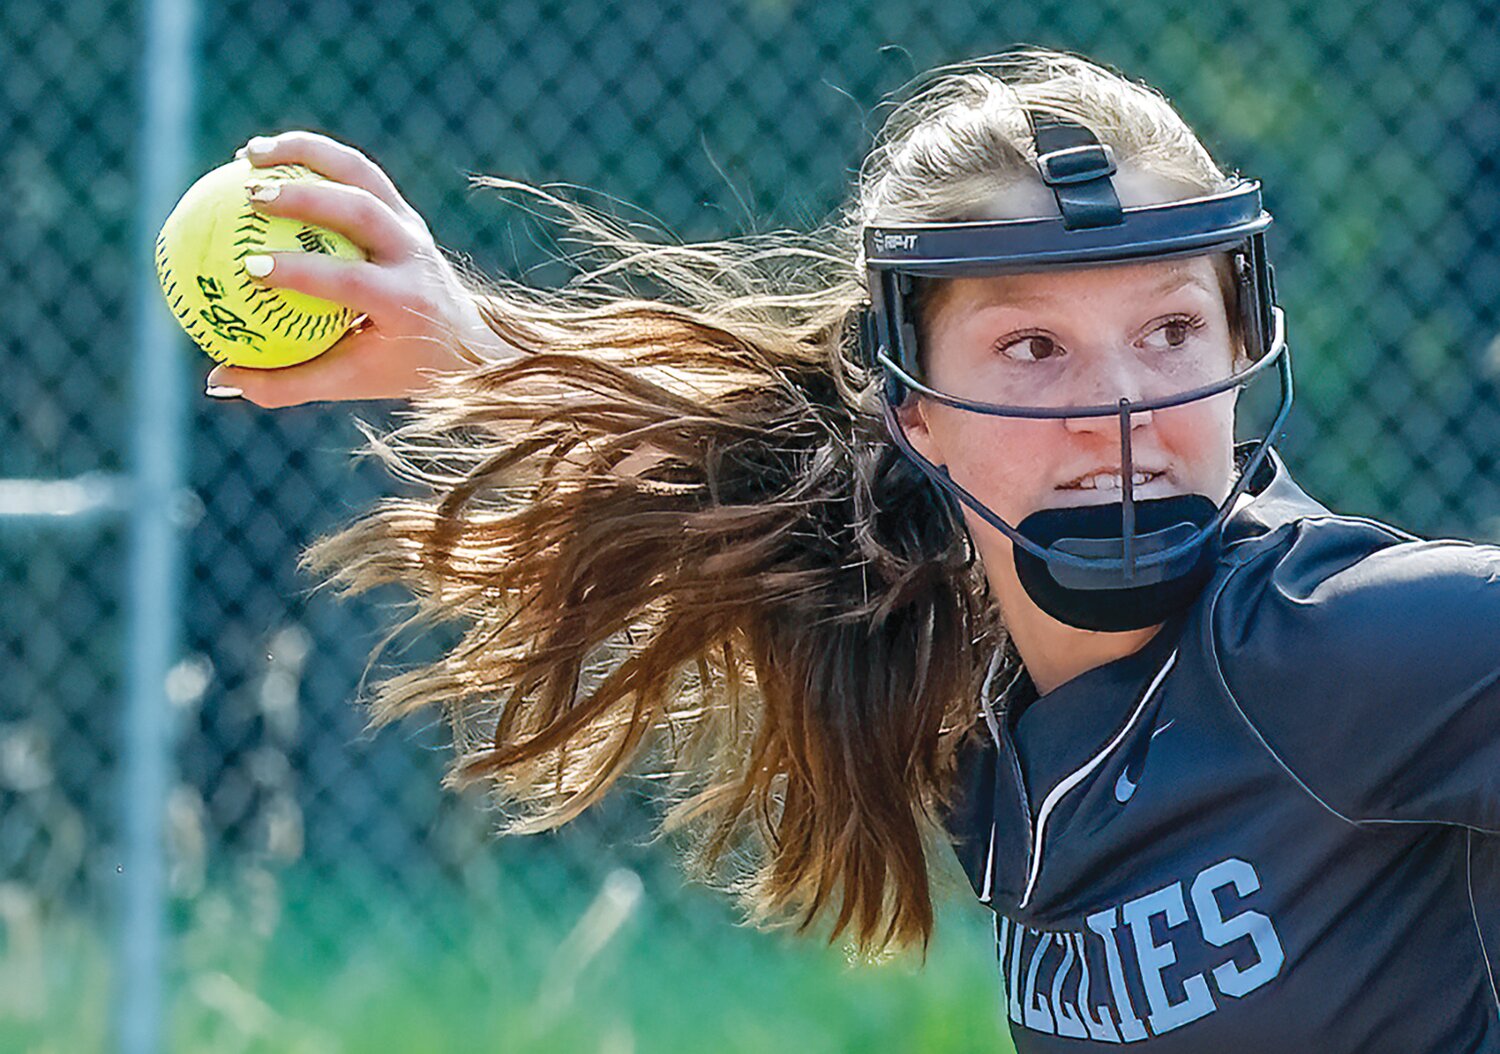 Grizzlies’ third baseman Helen Koch eyes first as she fielded a hot grounder during playoff competition on Tuesday.